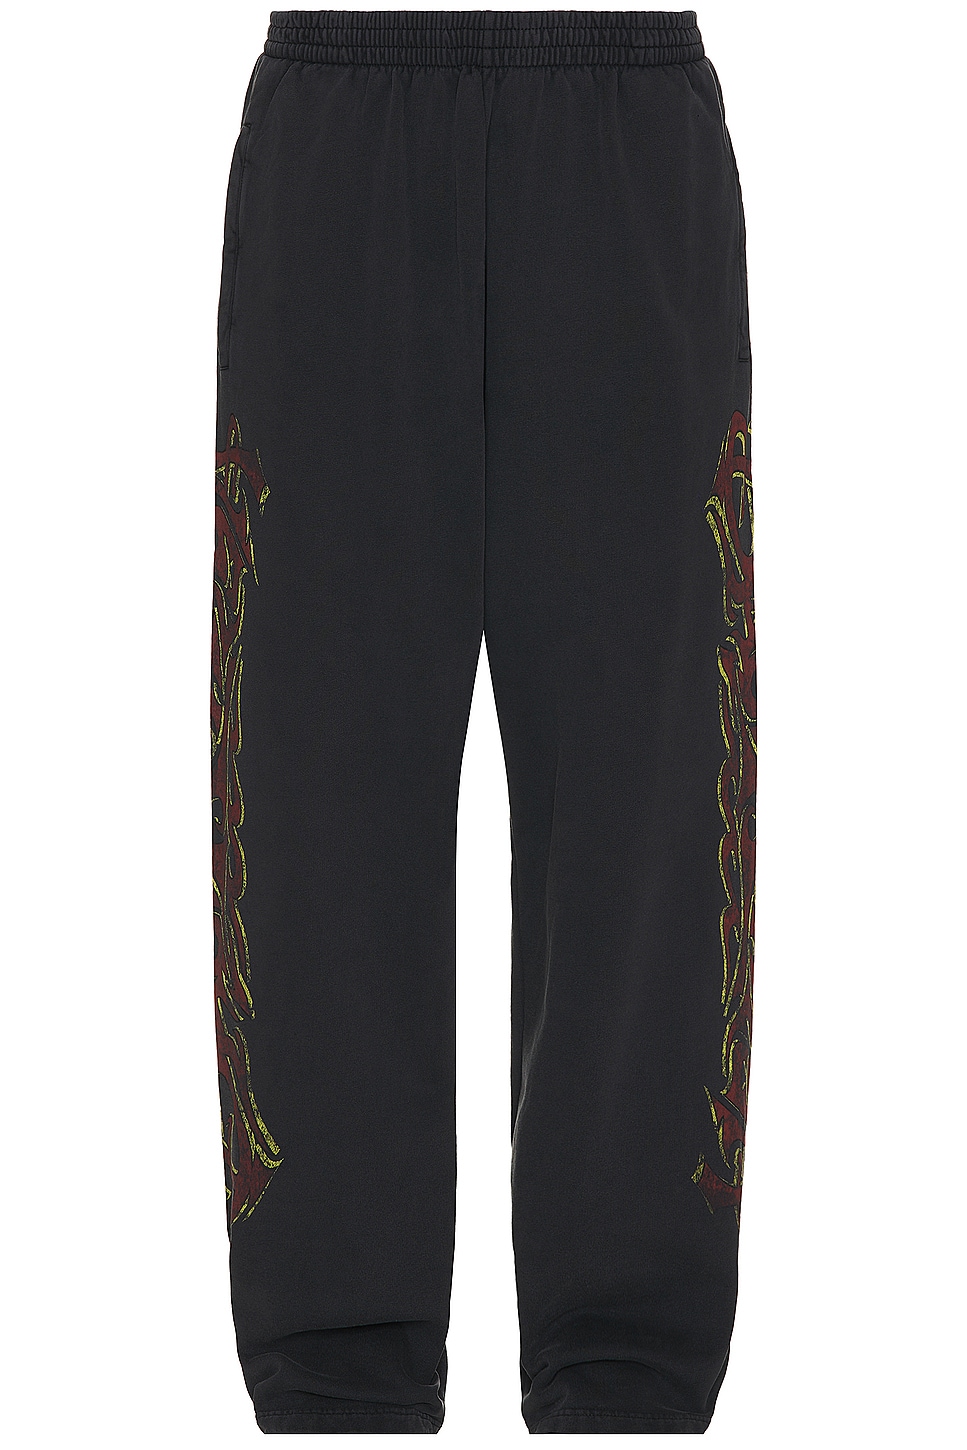 Image 1 of Balenciaga Baggy Sweatpant in Faded Black & Red